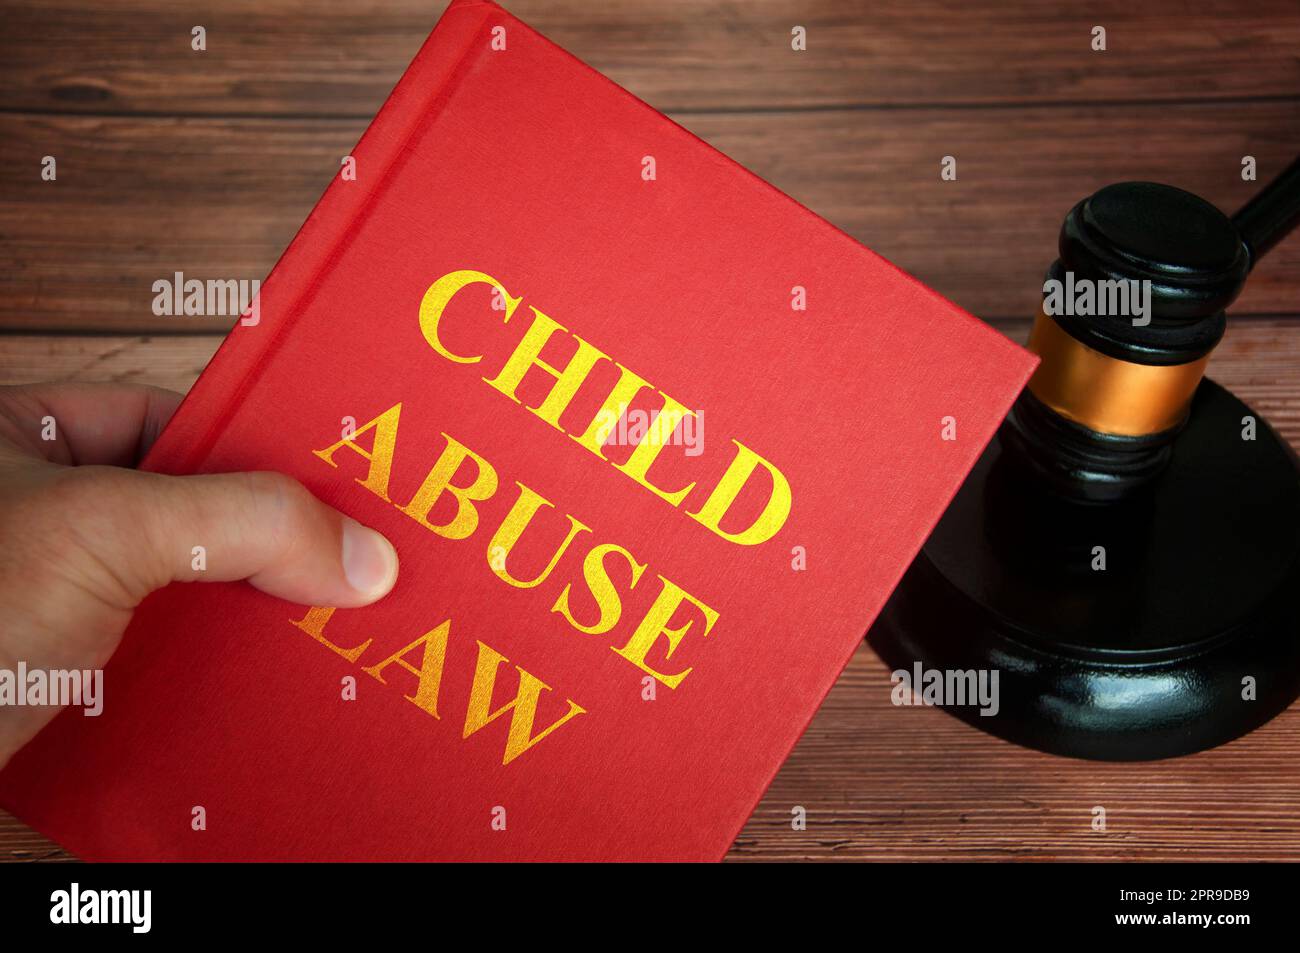 Child abuse law text on law book with judge gavel on wooden desk background. Stock Photo